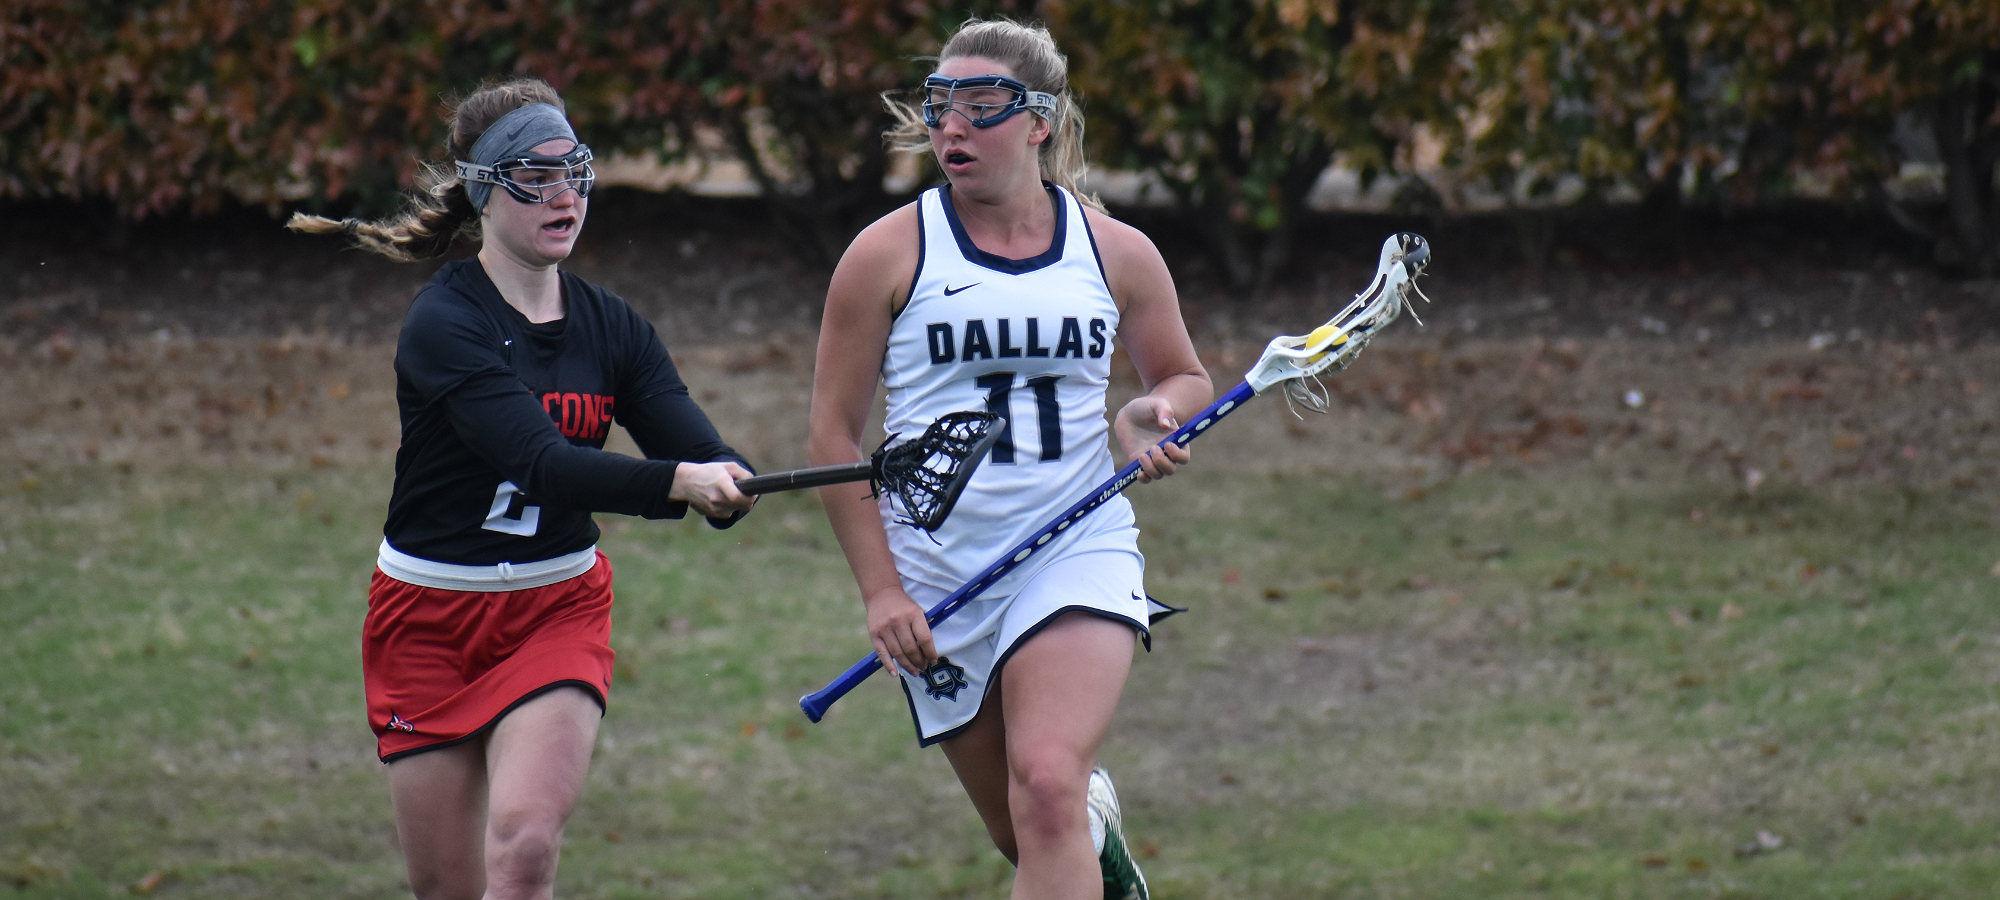 Leite Moves to 2nd All-Time in Goals; Falcons Offense Powers by Women's Lacrosse